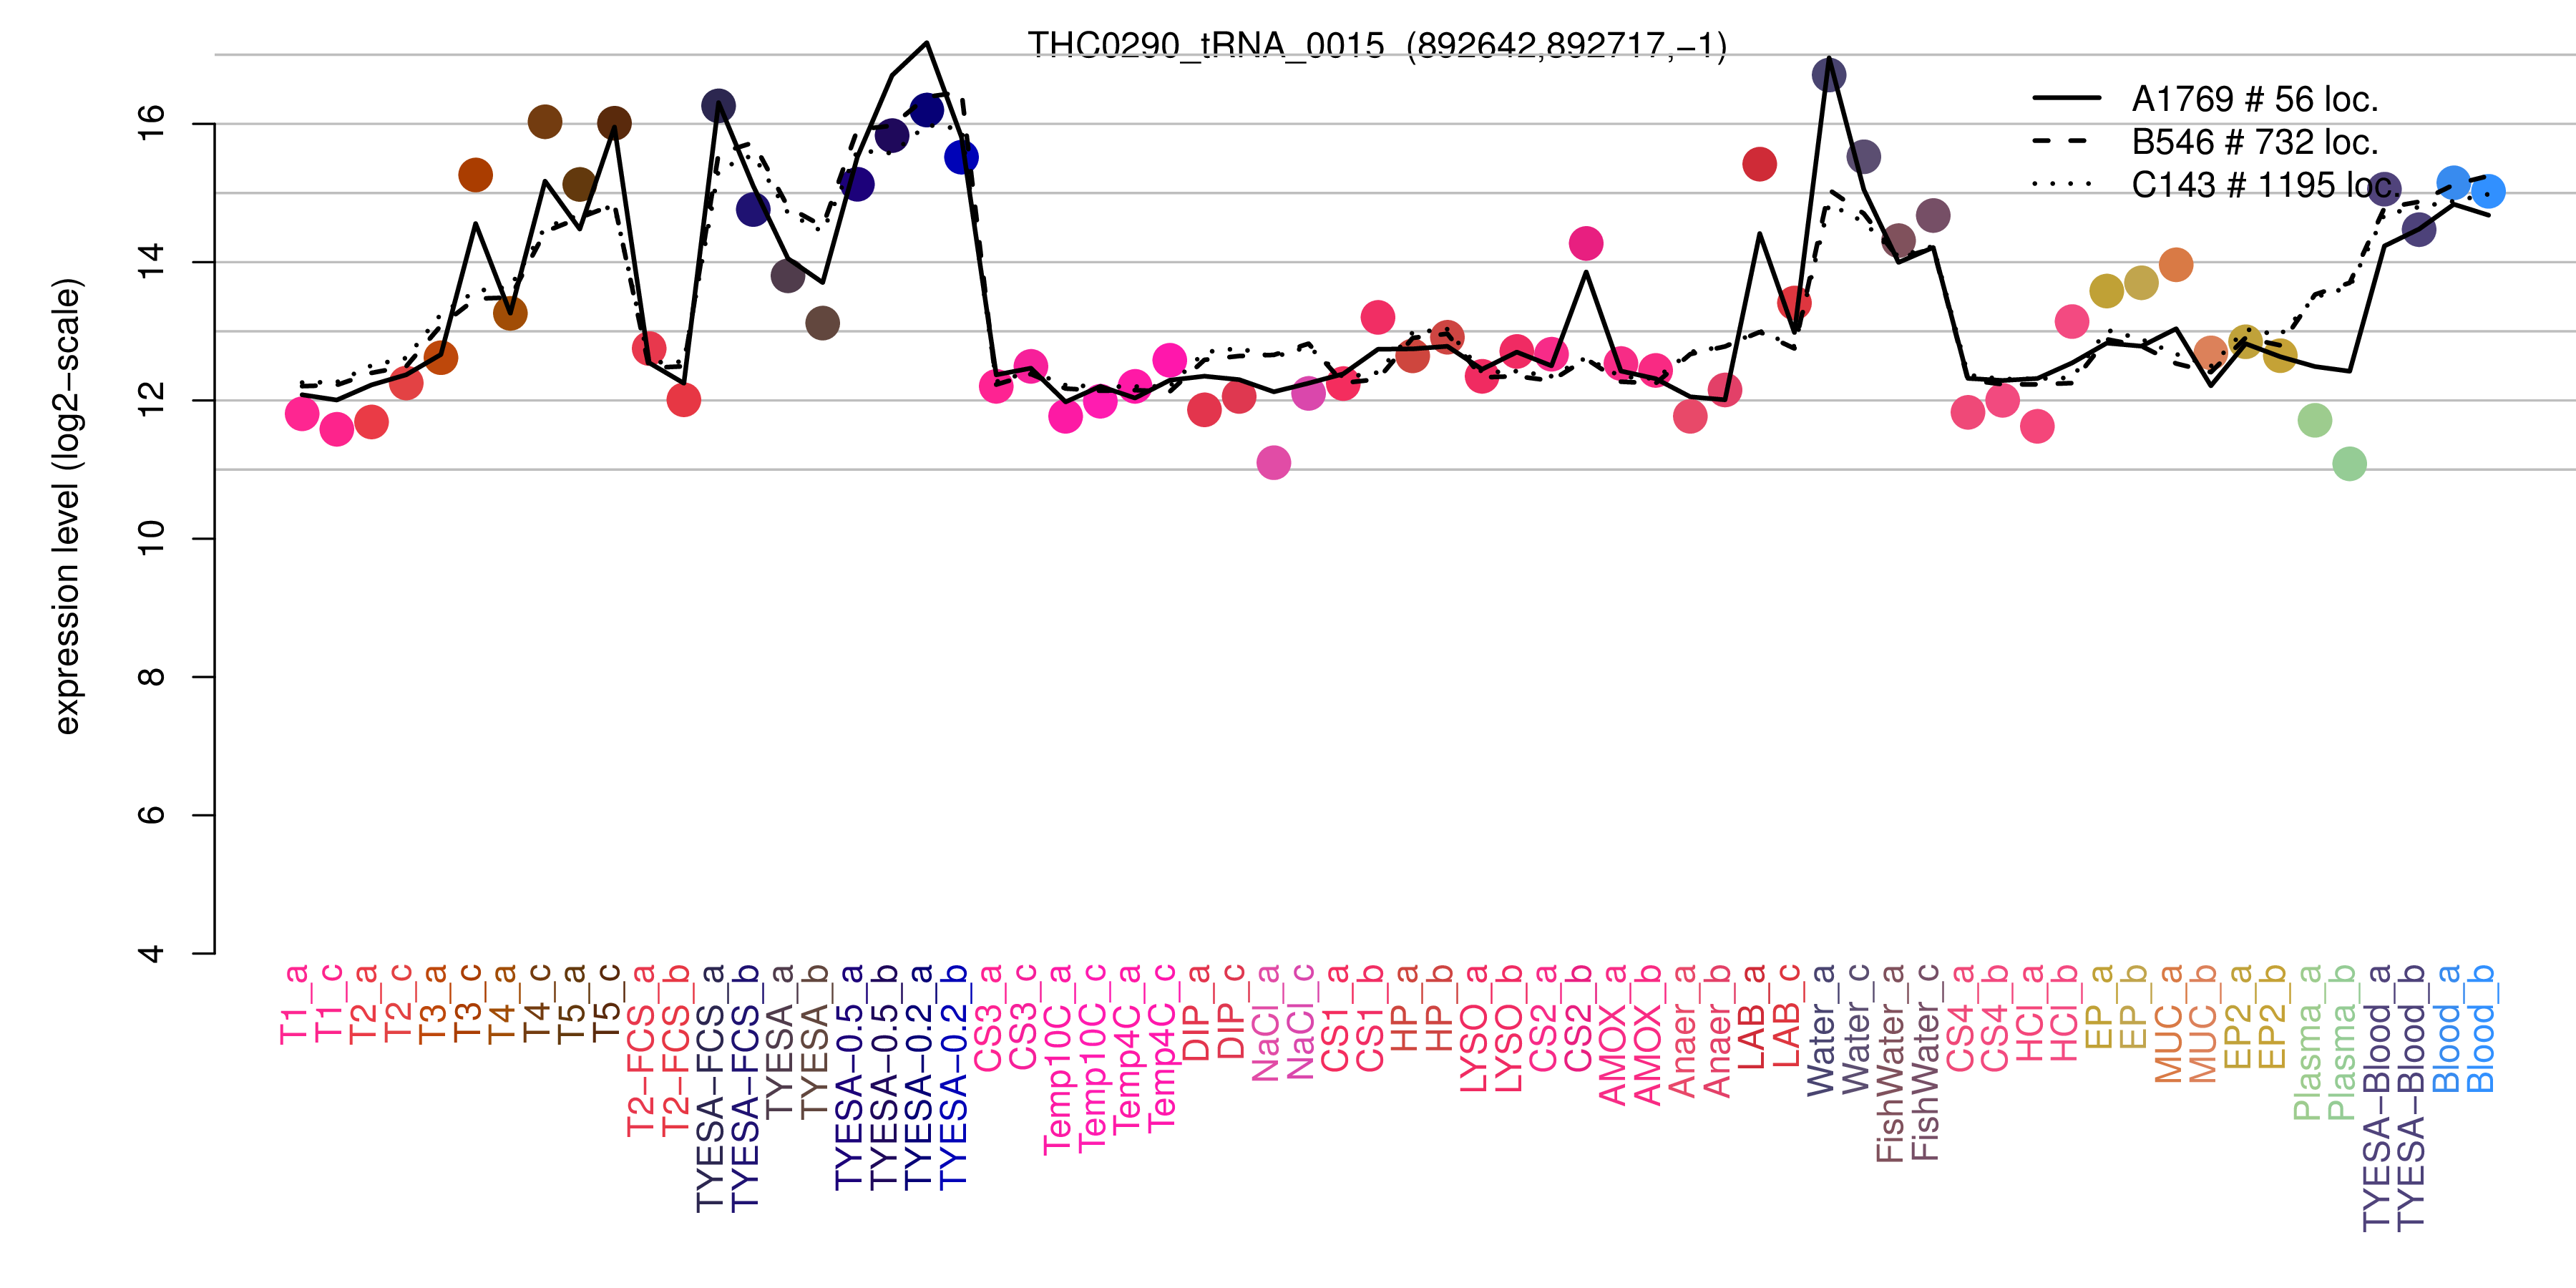 THC0290_tRNA_0015 expression levels among conditions